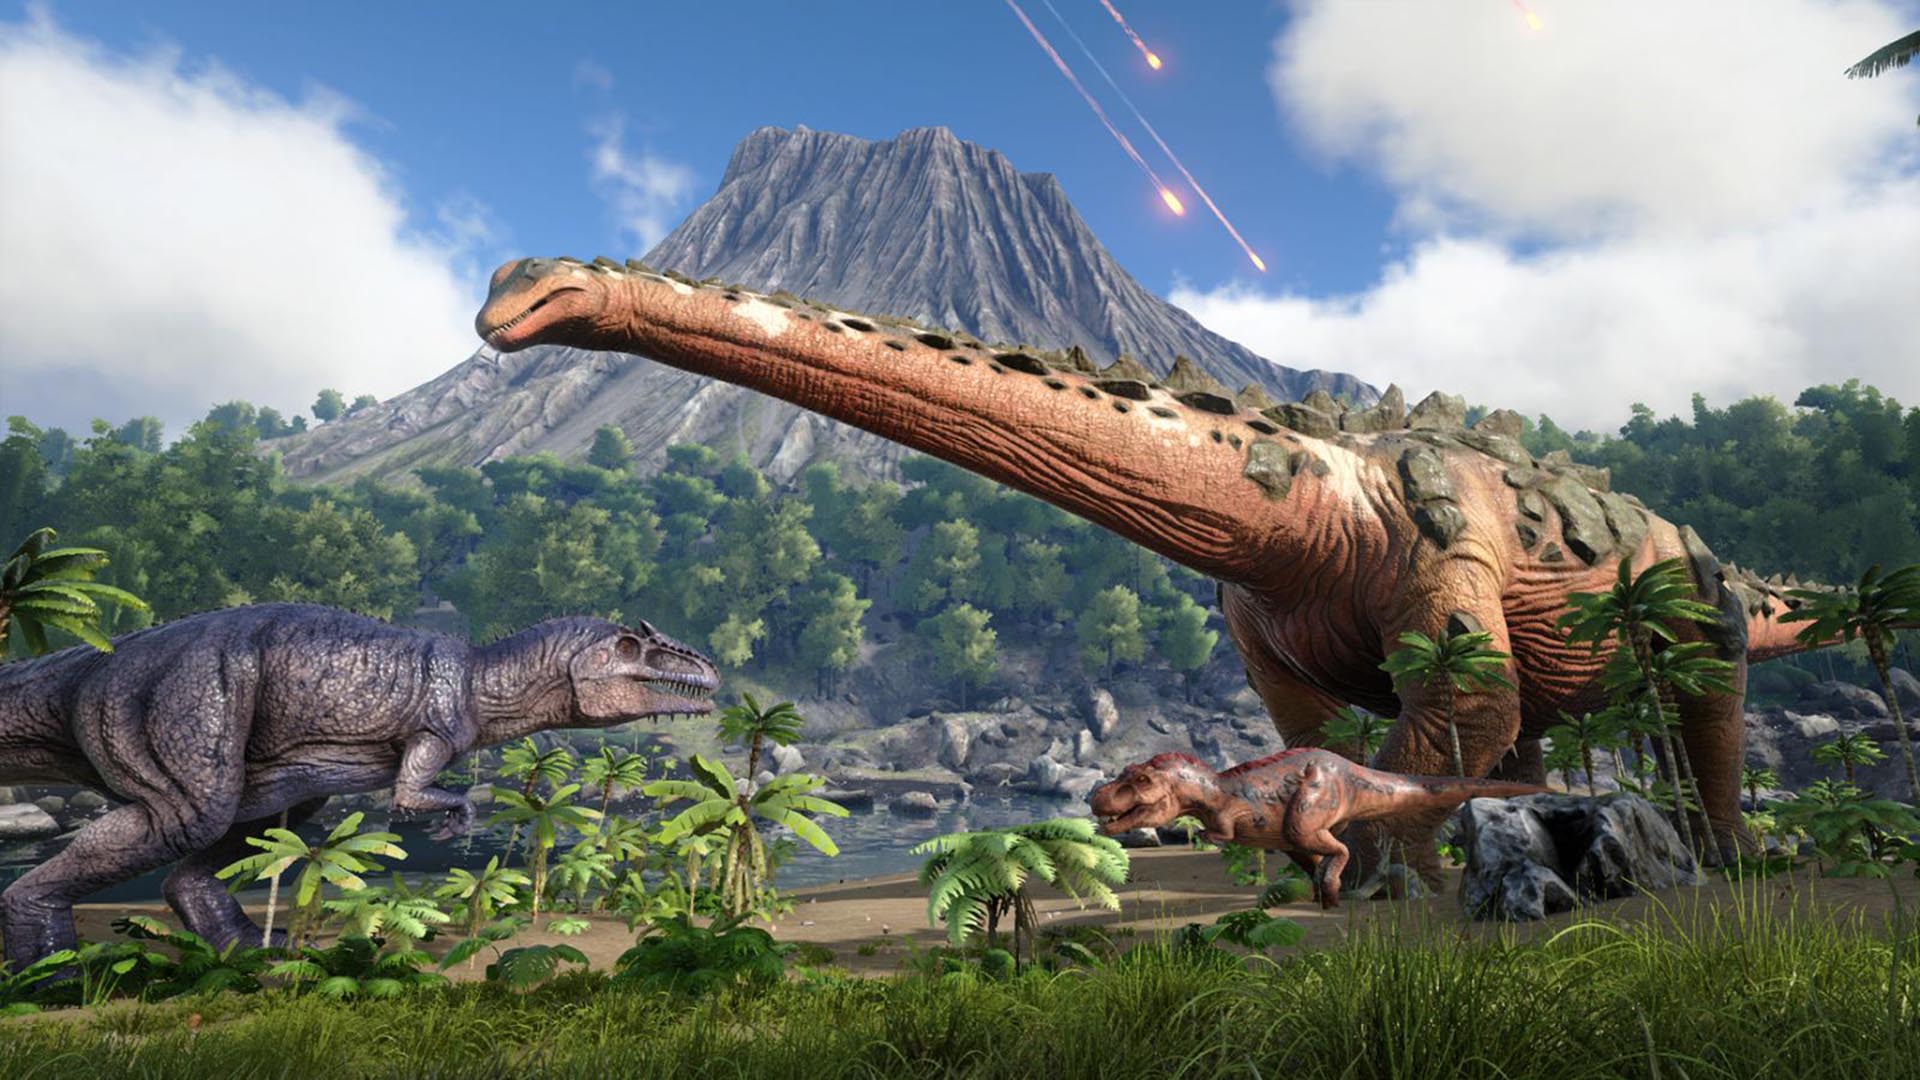 playstation store ark